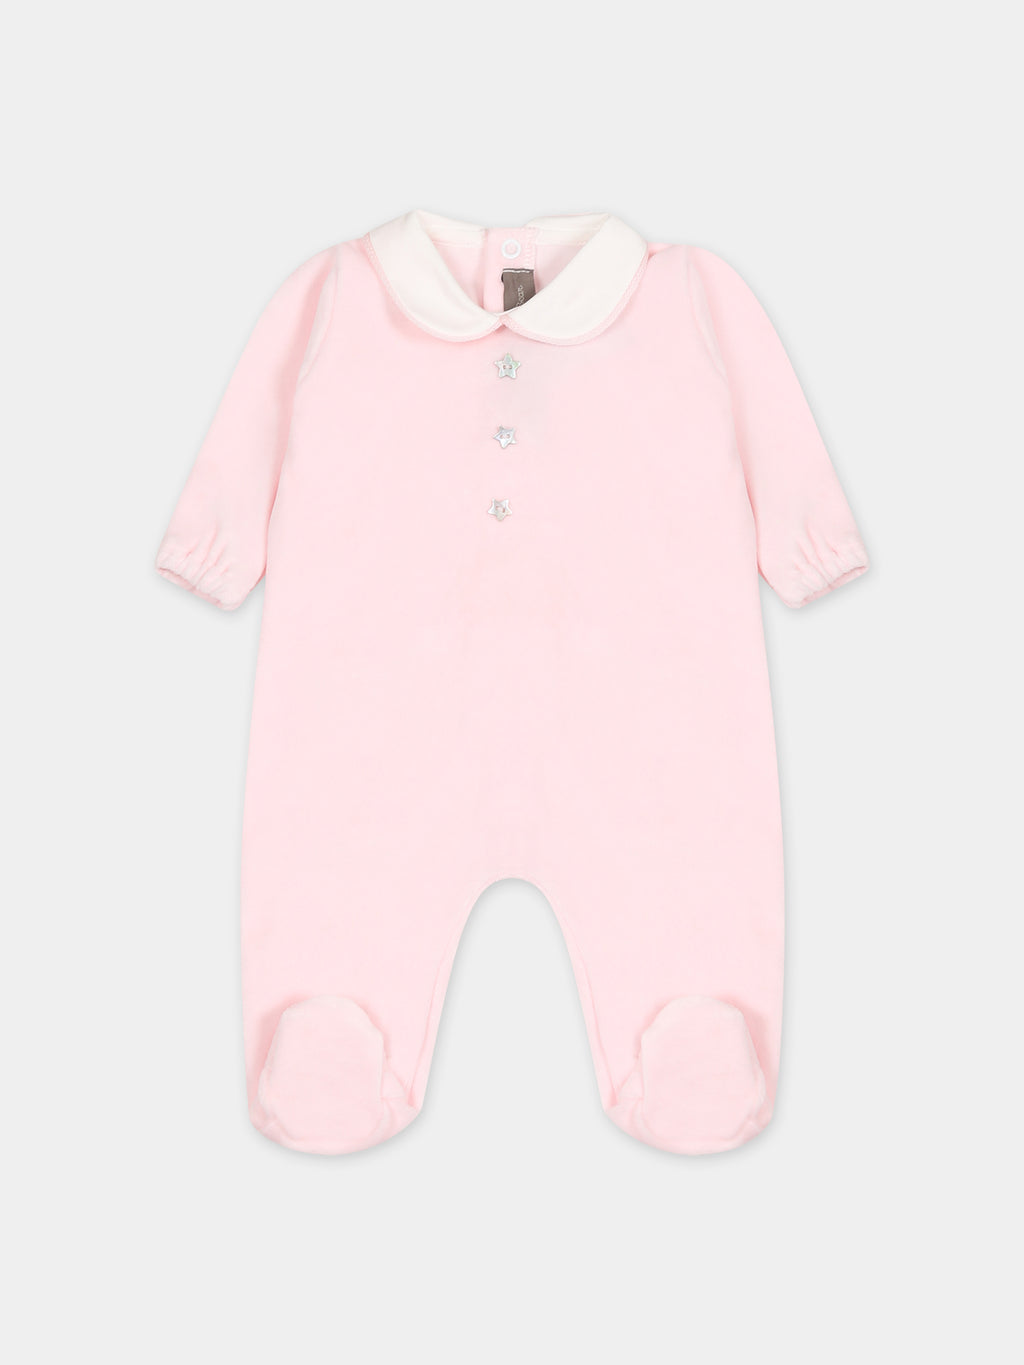 Pink babygrow for baby girl